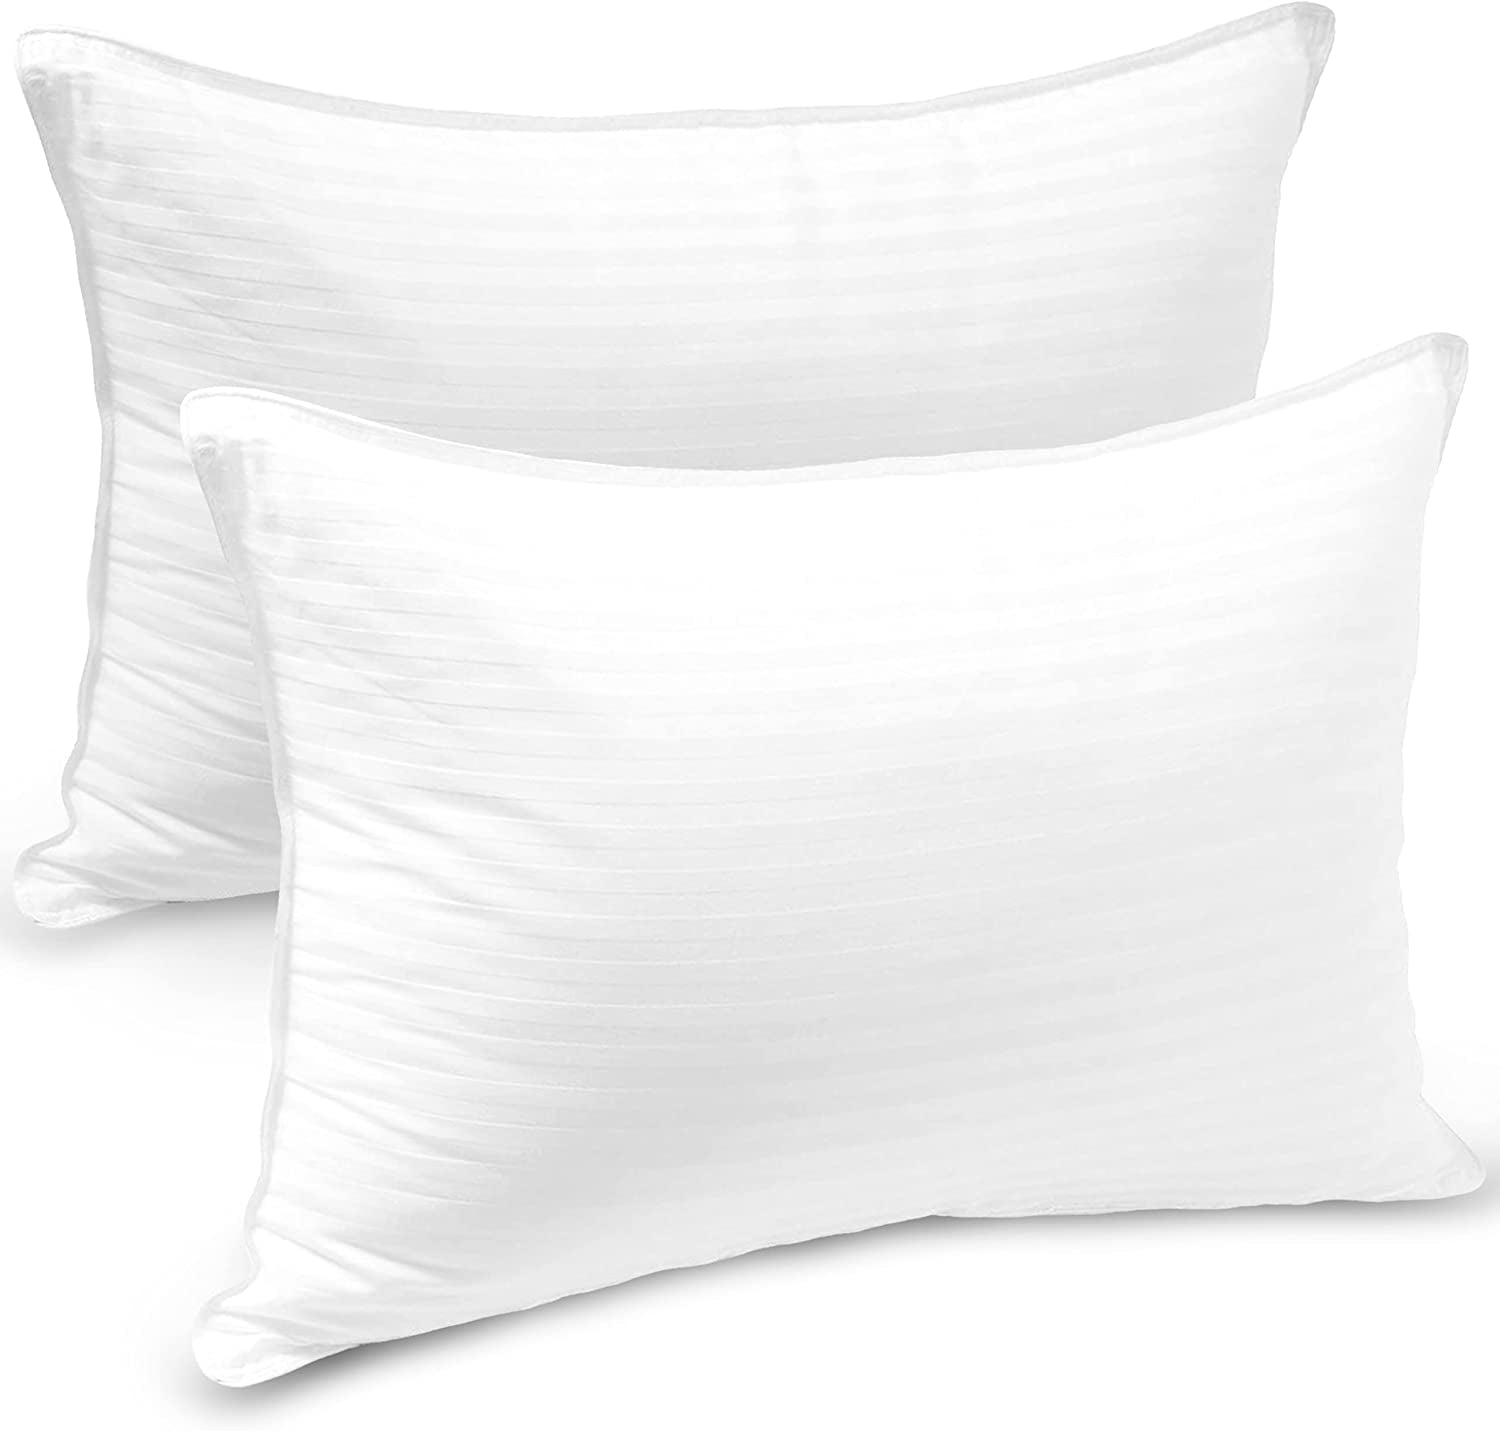 MÜELLERHOME Mueller Hotel Collection Pillows for Side Sleepers, European  Made, Cooling Gel Pillows Queen Size Set of 2, Pillows for Sleeping Back